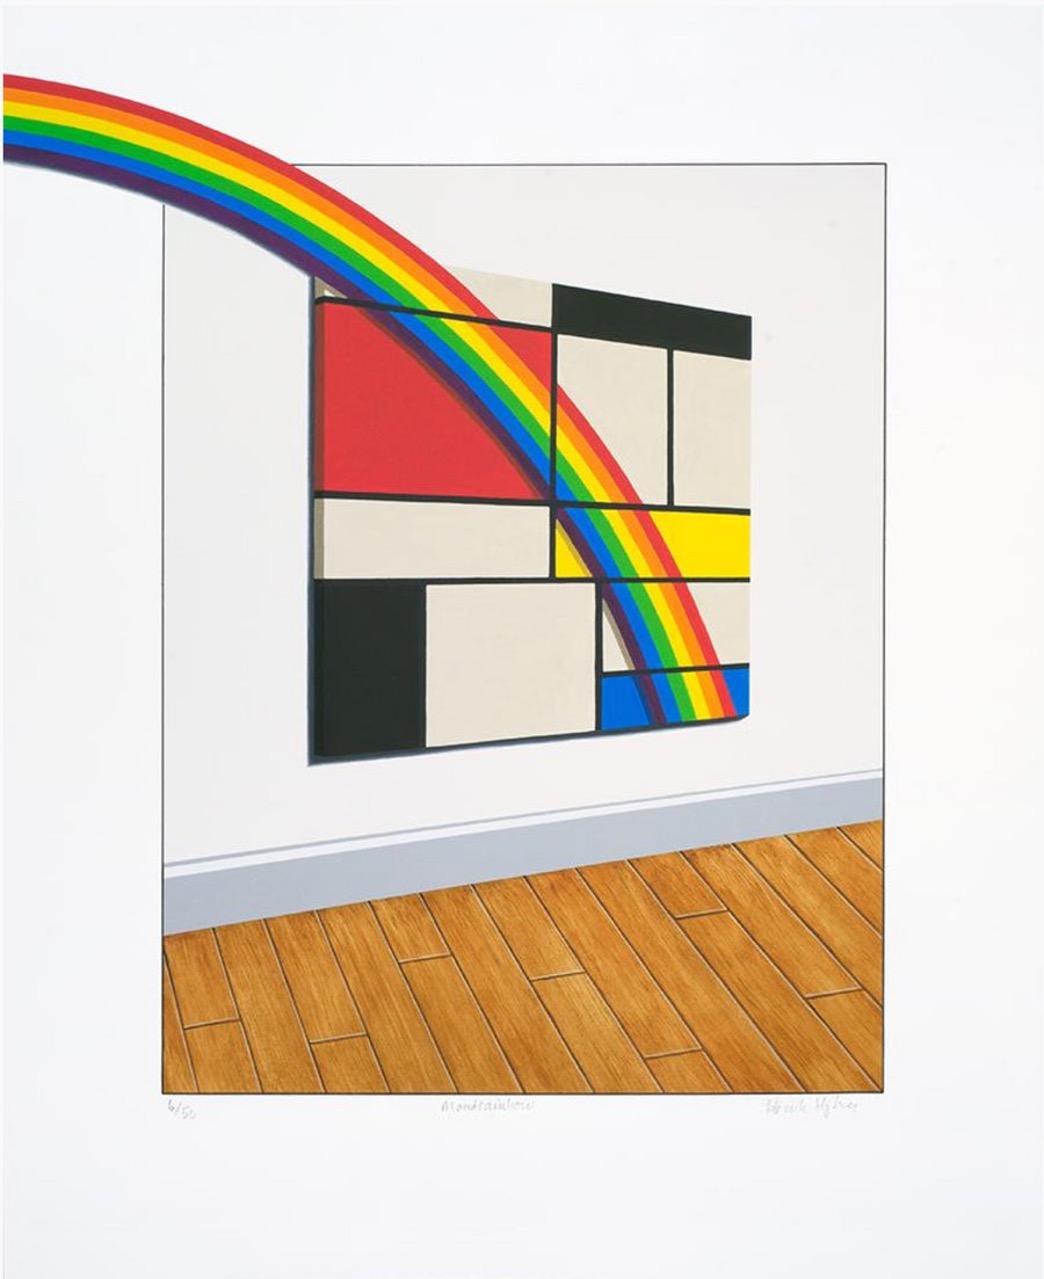 Patrick Hughes - Mondrainbow, 2018

Medium:	Archival Inkjet on Somerset Satin Enhanced 330gsm Paper
Edges:	Cut
Year:	2018
Edition:	50
Size:	49.5cm x 60.5cm
Signature: Hand-signed and numbered